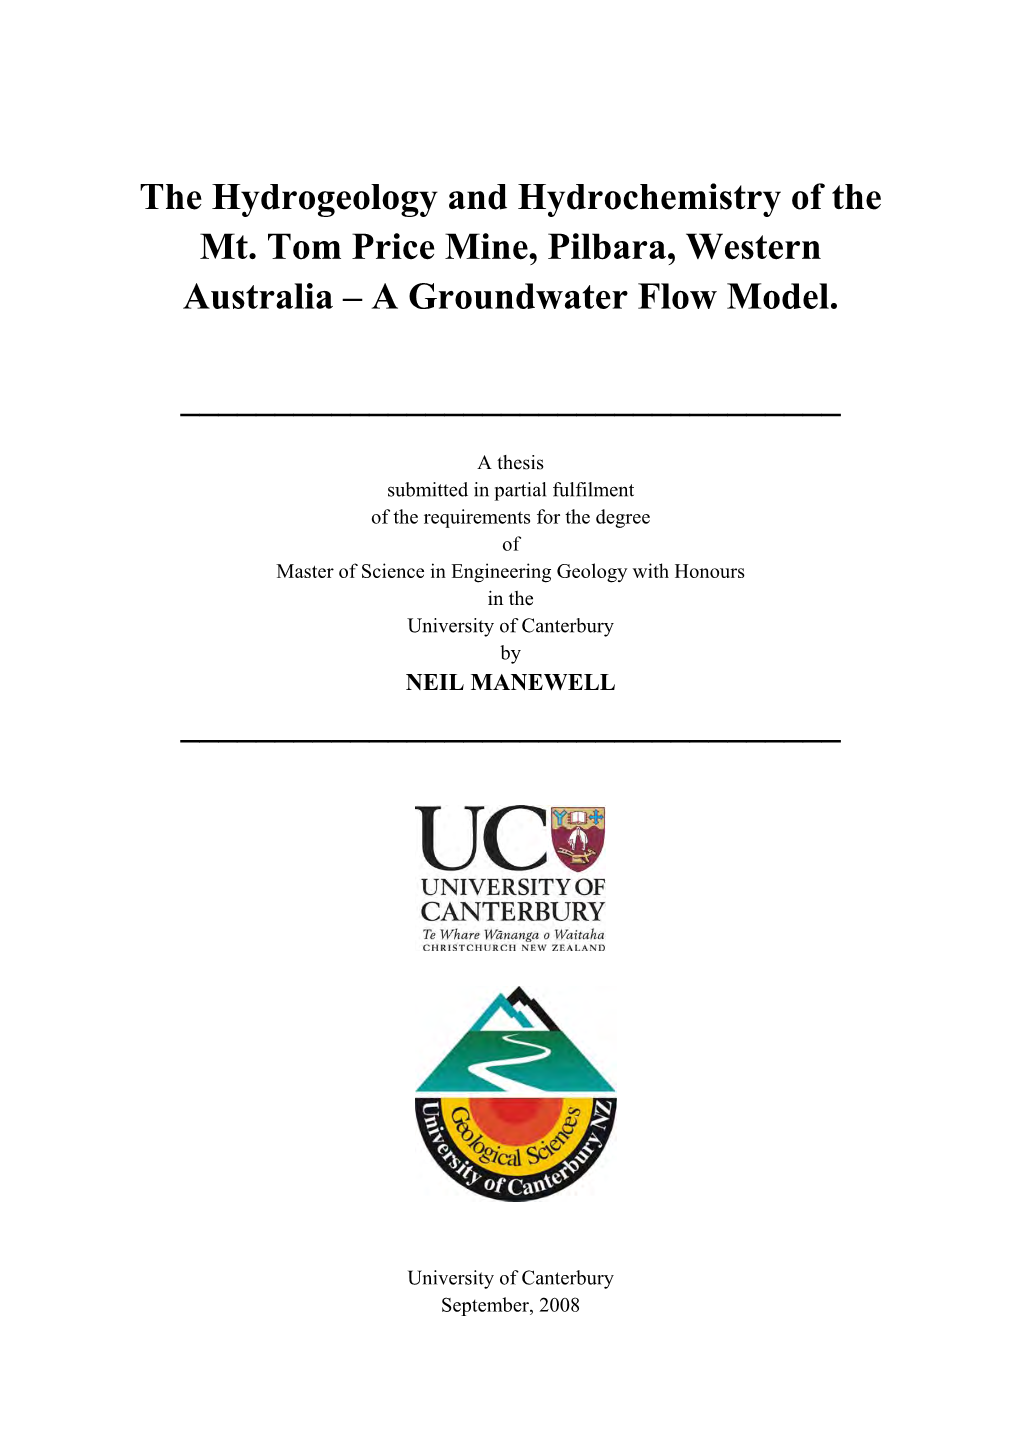 The Hydrogeology and Hydrochemistry of the Mt. Tom Price Mine, Pilbara, Western Australia – a Groundwater Flow Model